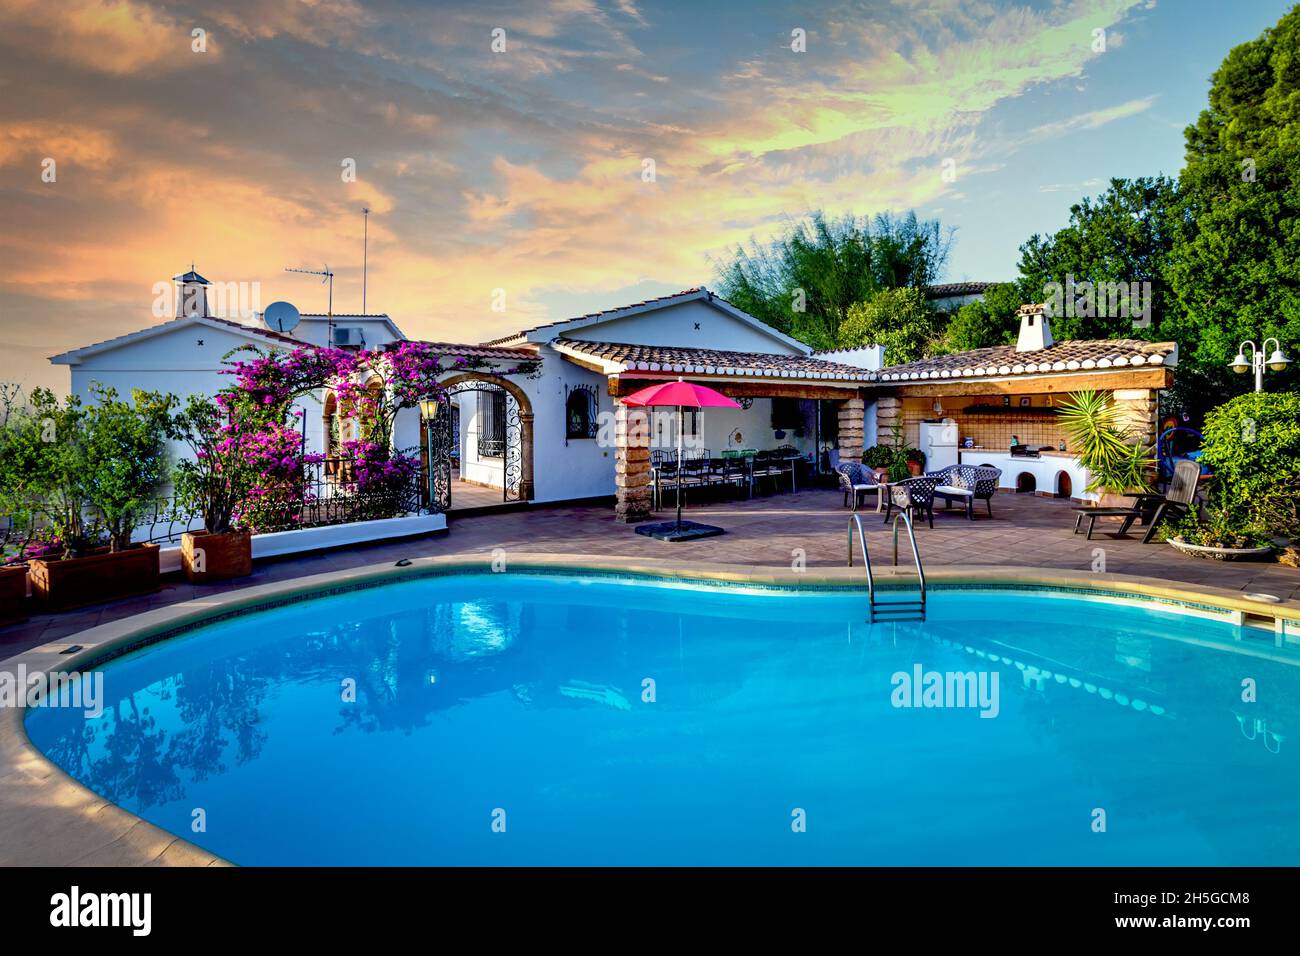 Mid-Mediterranean villa with pool, garden and dramatic sky. Stock Photo